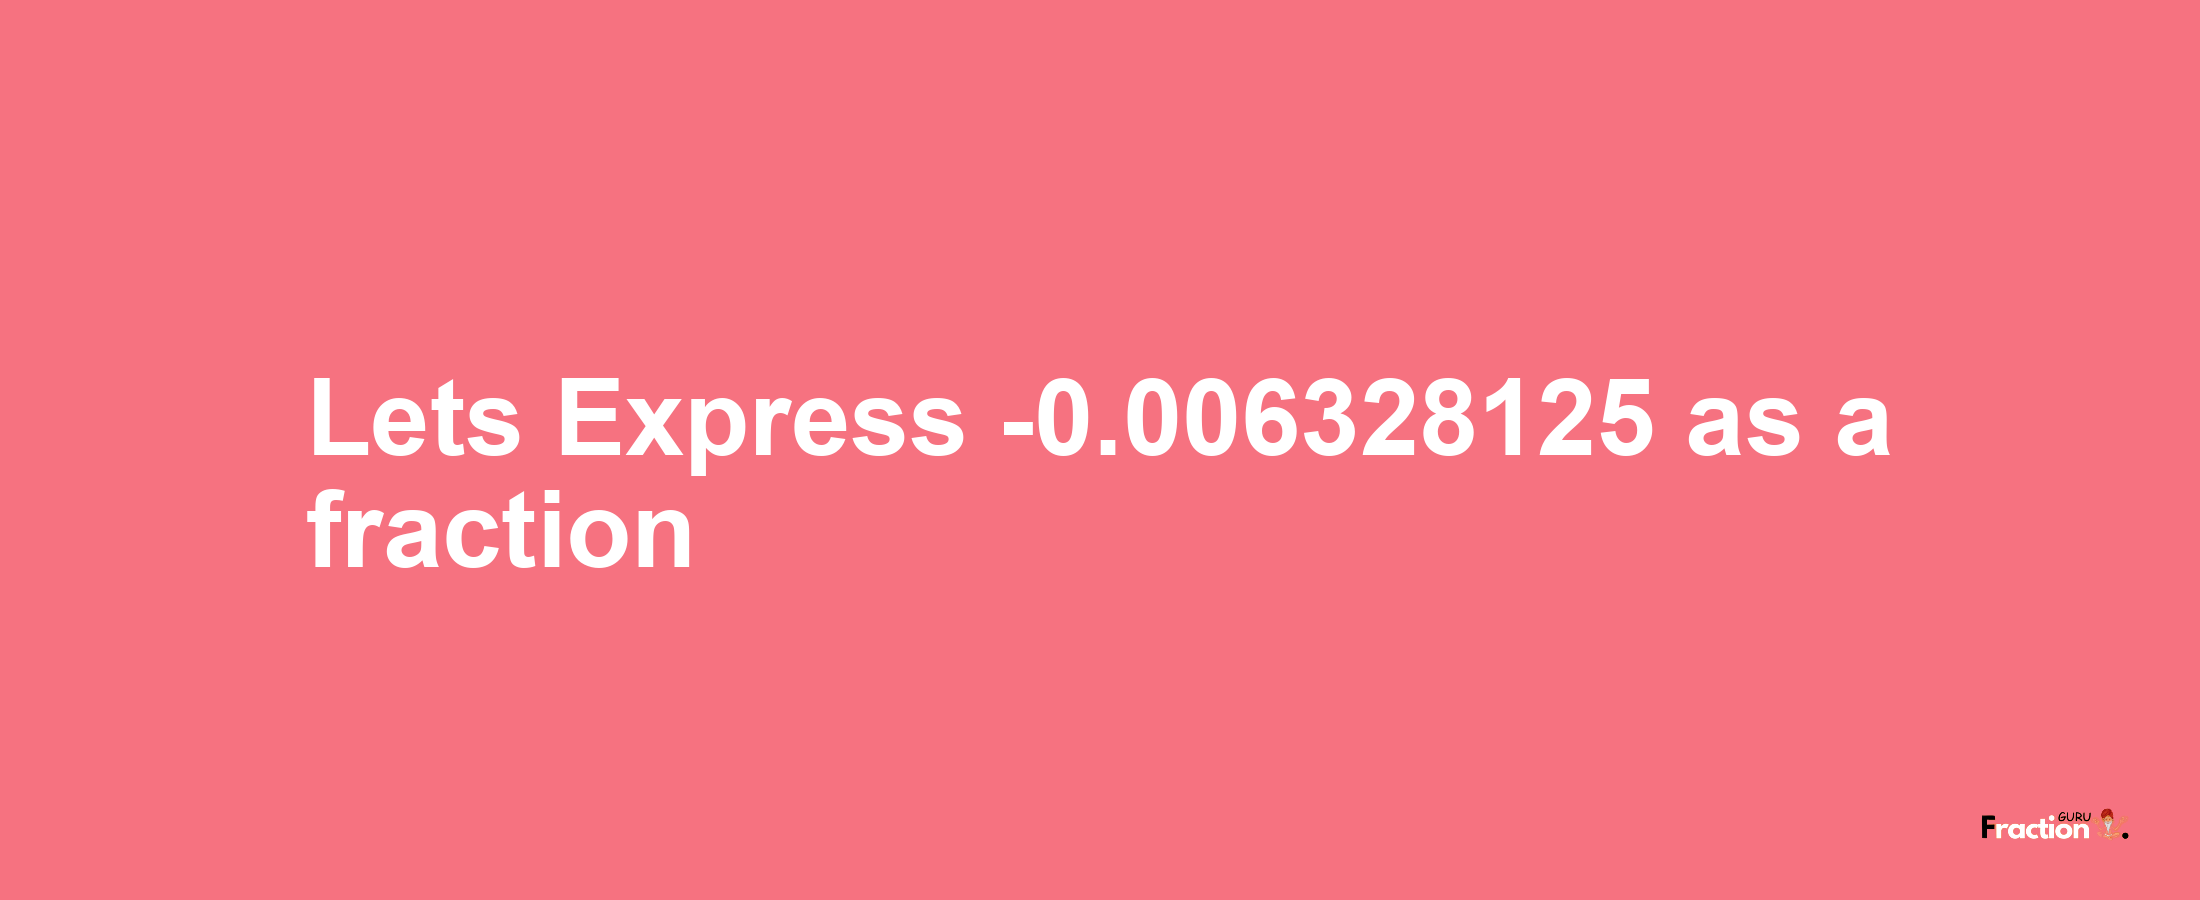 Lets Express -0.006328125 as afraction